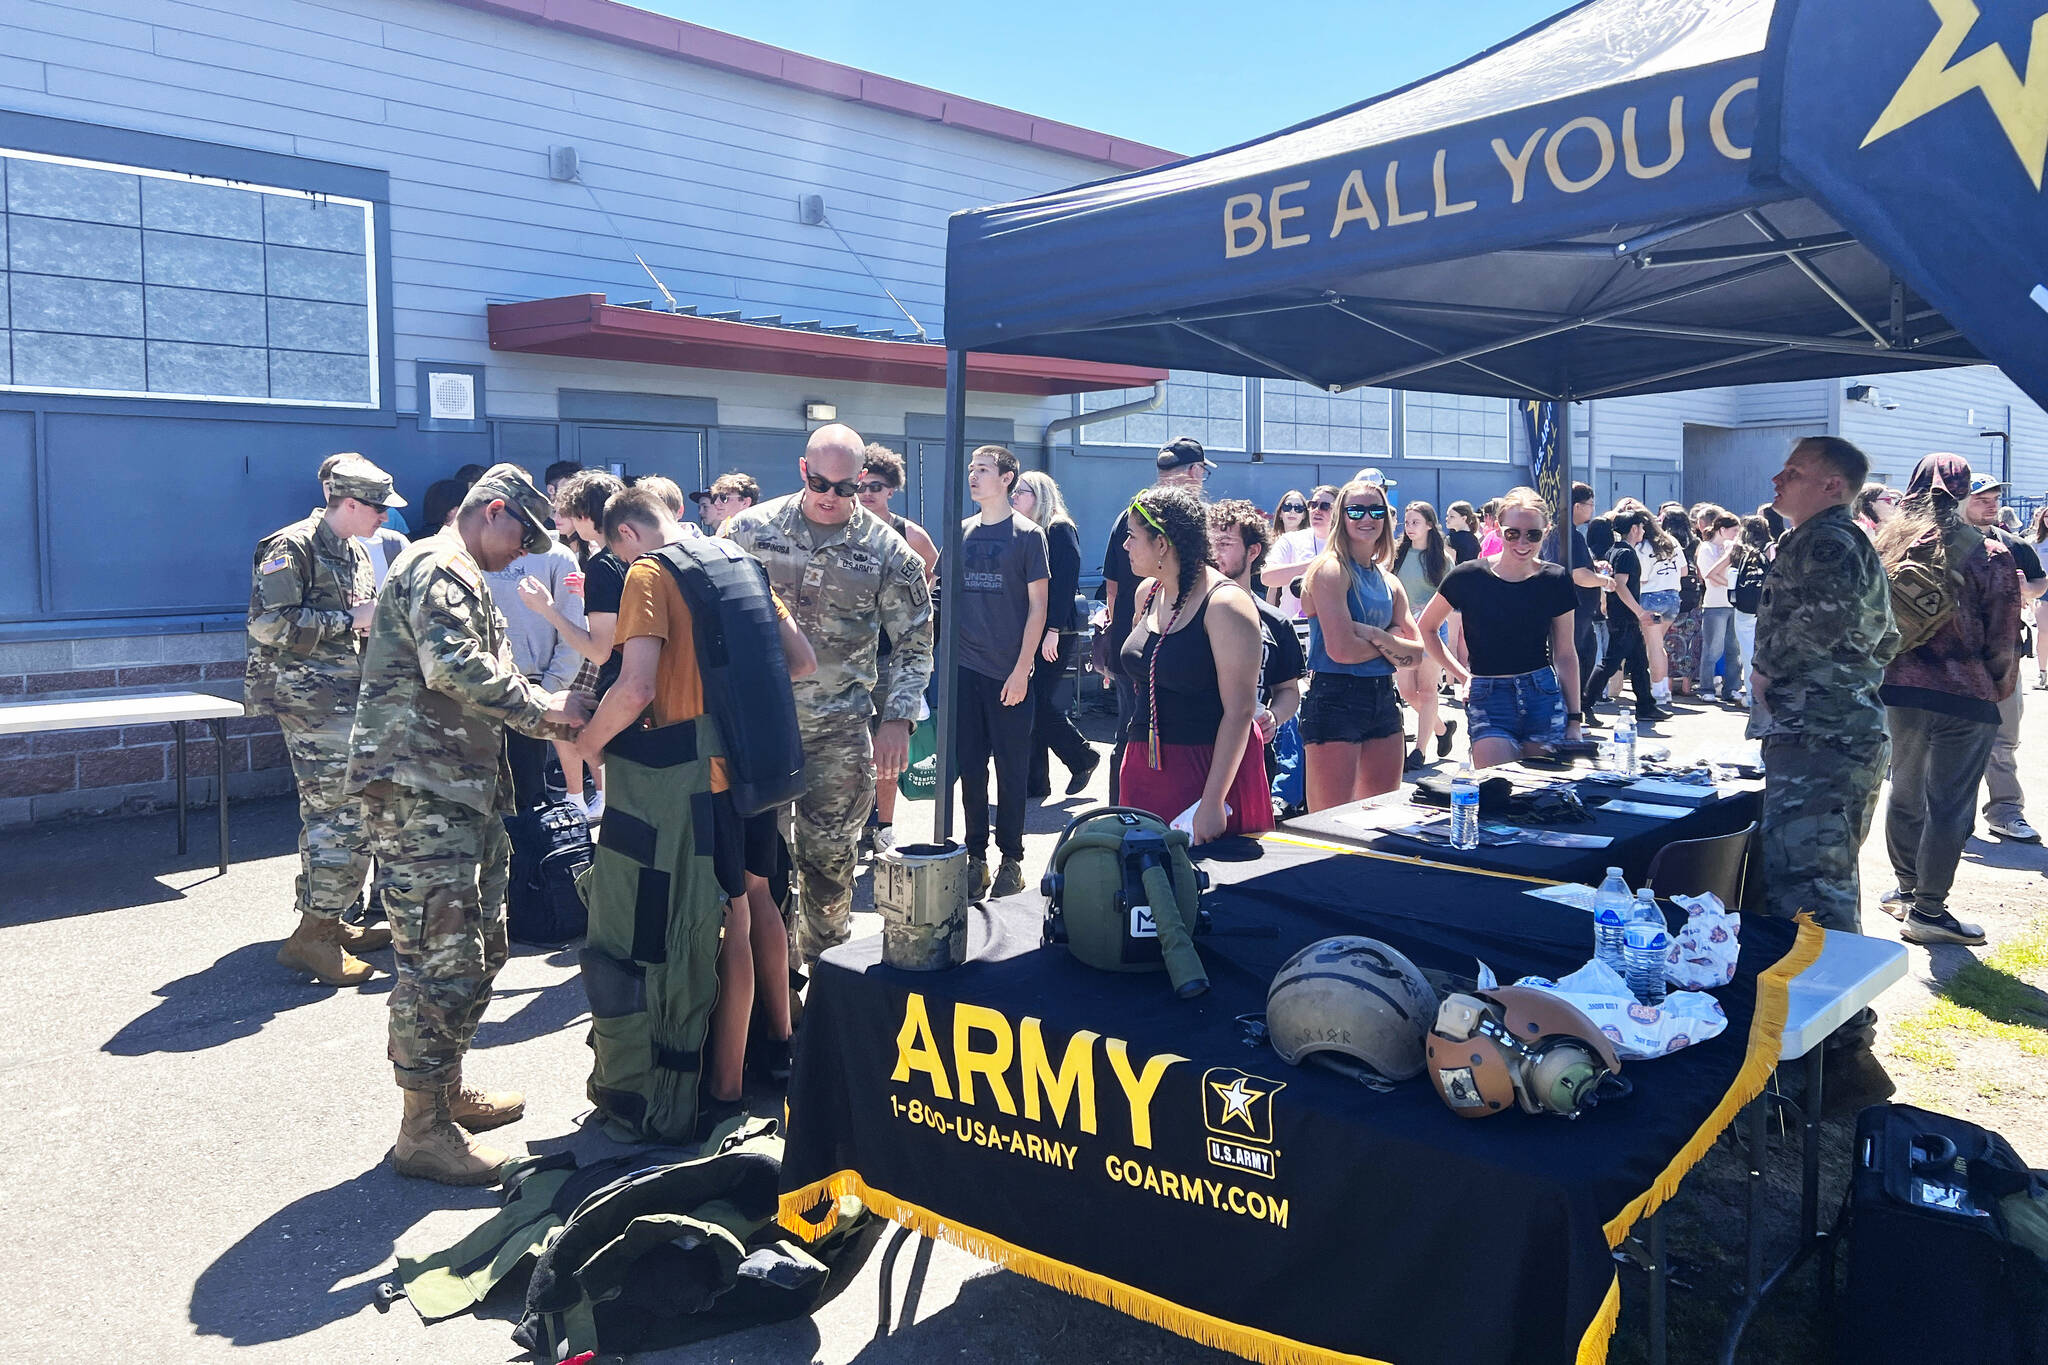 Among some of the vendors at the EHS Career and Cultural Festival were some big names like the U.S. Army, Boeing, Virginia Mason Franciscan Health, and more. Photos courtesy Enumclaw School District